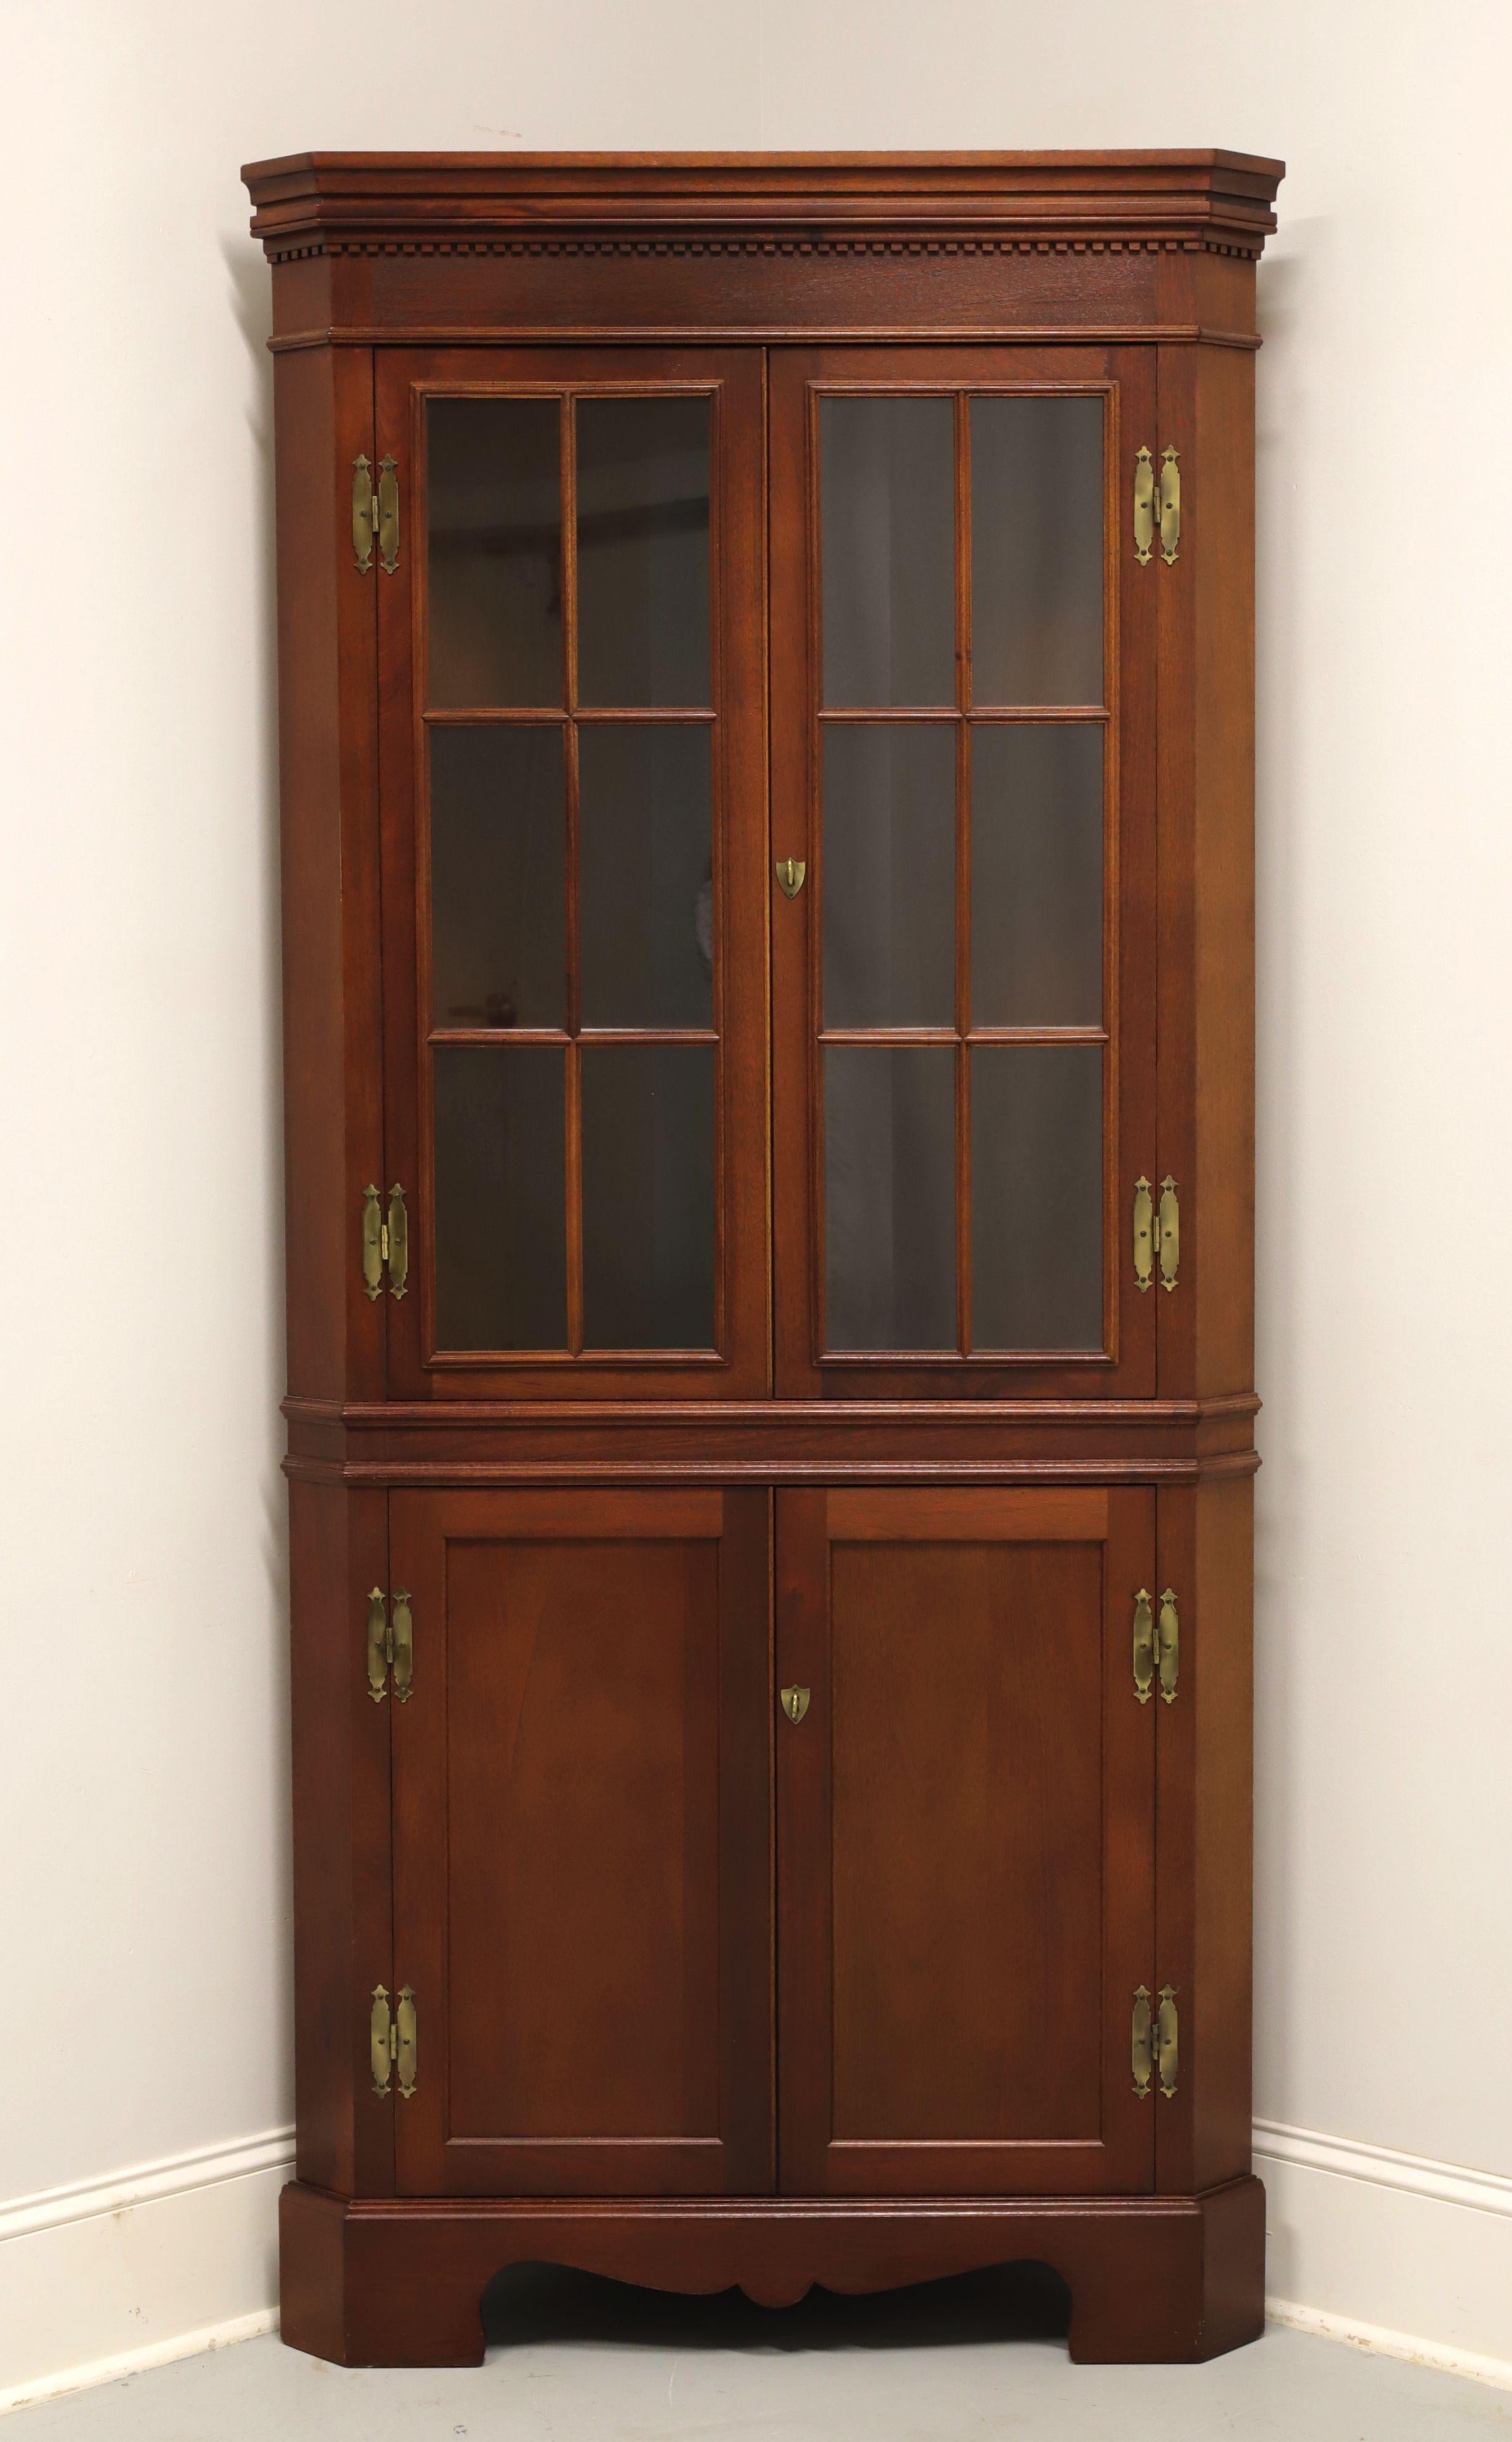 A Chippendale style corner cupboard by high-quality furniture maker Craftique. Solid mahogany with their Old Wood finish, crown & dentil molding to top, carved apron, and bracket feet. Upper cabinet features two fixed plate-grooved wooden shelves